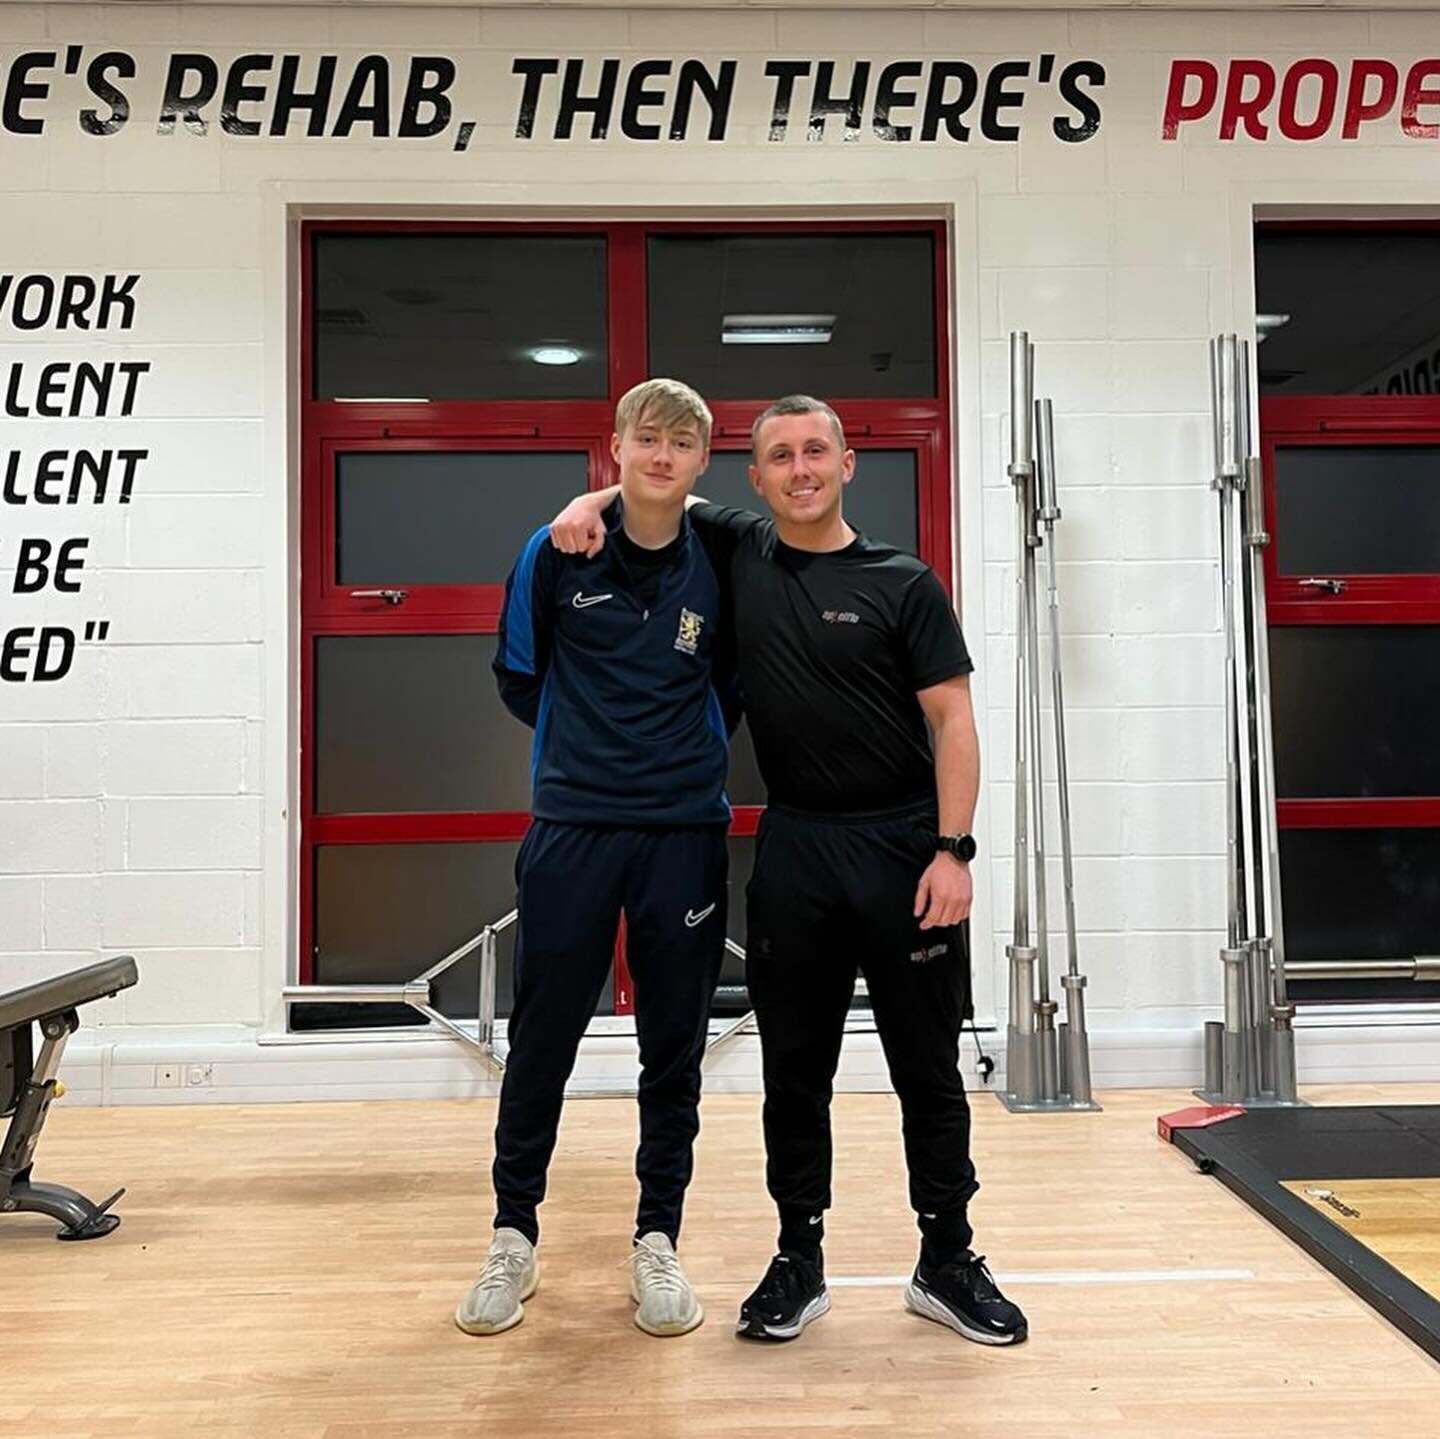 ⛑️Came to get fixed. 💪🏽 Stayed to get strong. ⚽️

🤬 A wee bit of lower back pain was limiting Joshua&rsquo;s performance on the park. 

✅ Joshua completed four weeks of Proper Rehab with us and has now progressed to our Lift It programme. 

🏋🏼&z